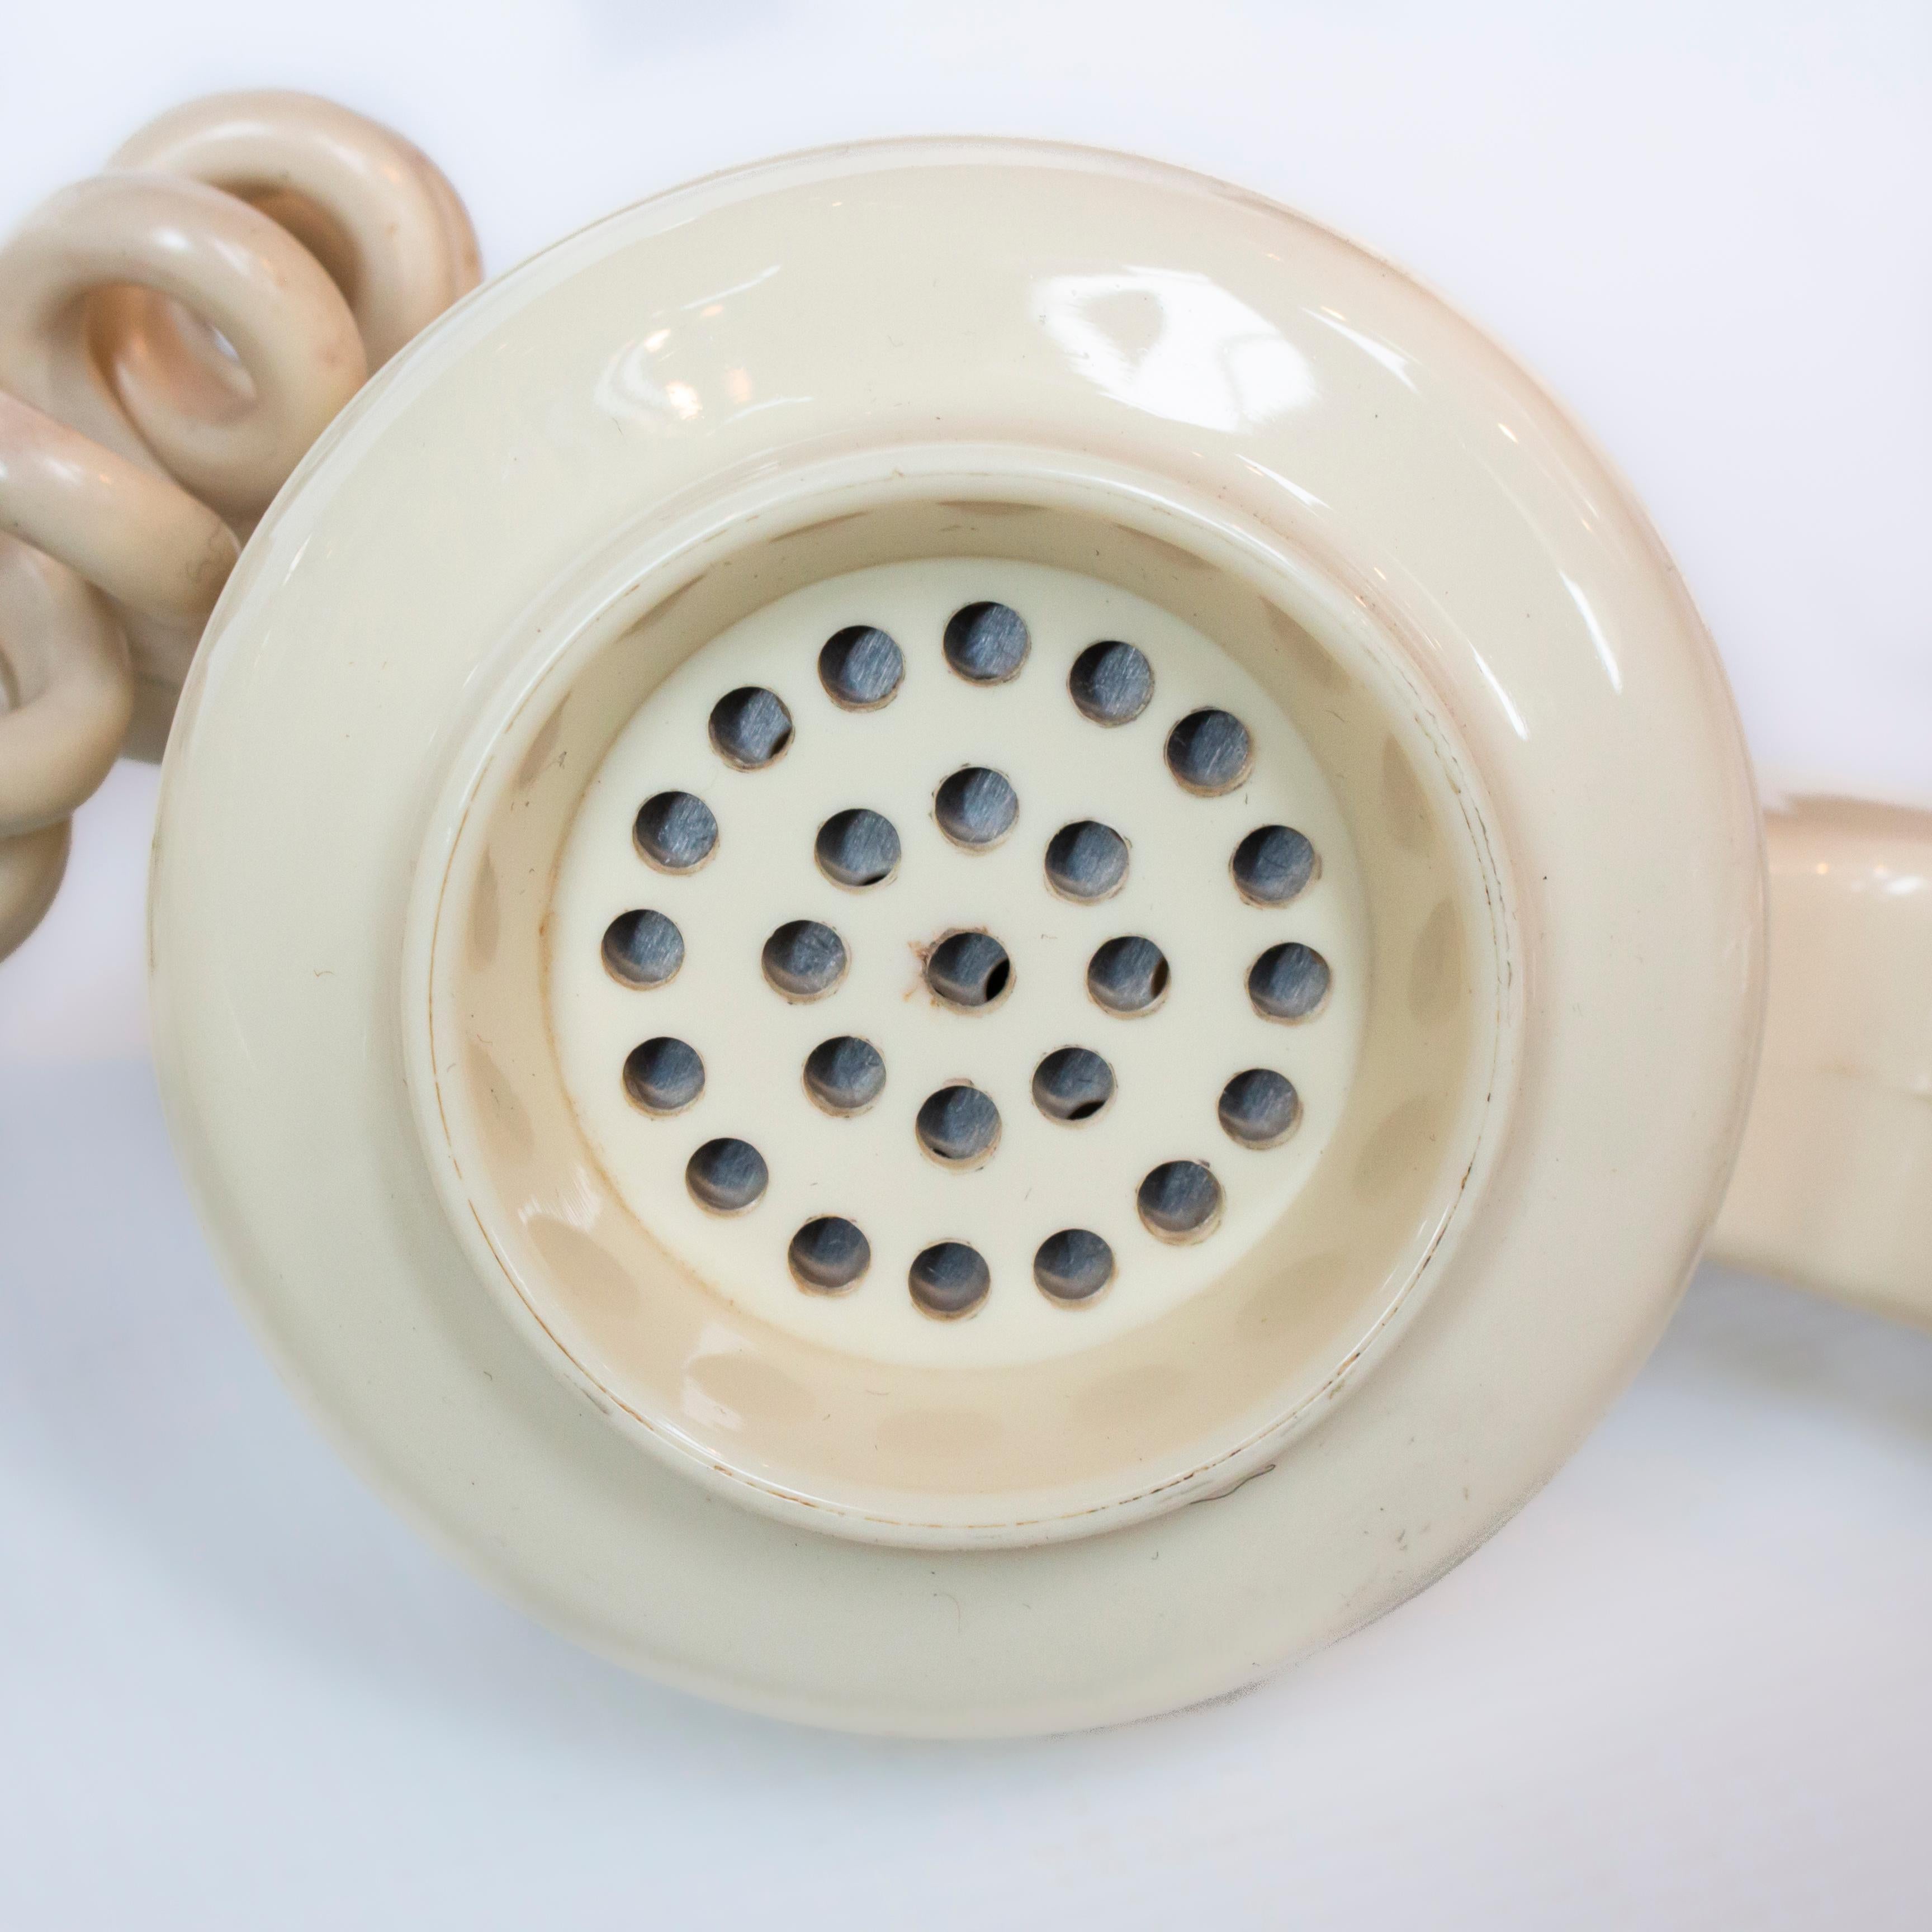 Original 1961 GPO Model 706 Telephone in Ivory, On/Off Bell Feature 3